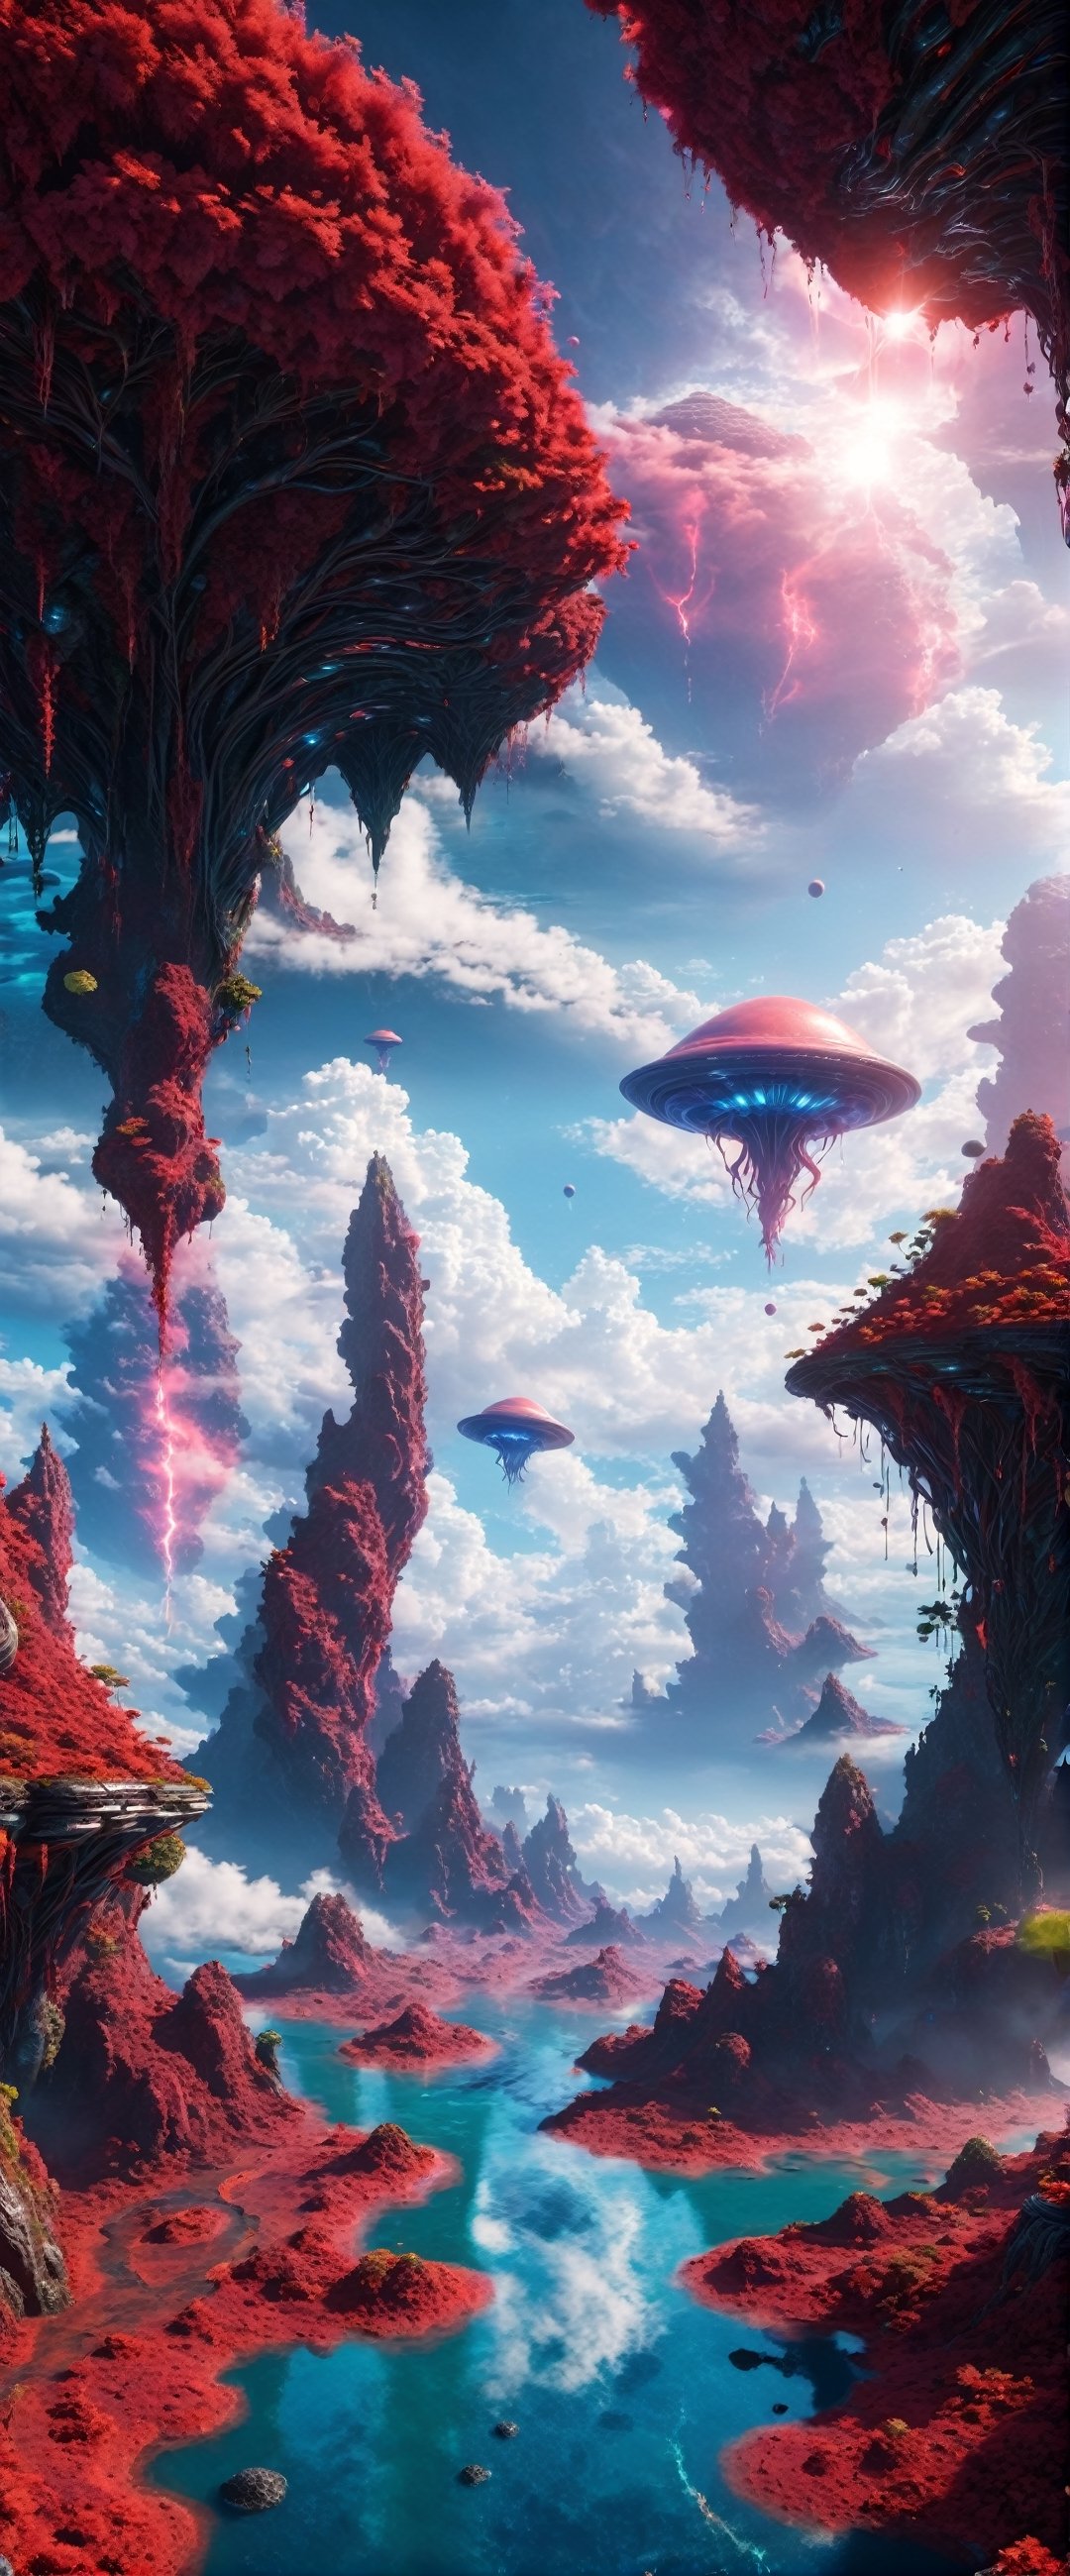 Extremely detailed alien landscape, floating islands, clouds, vines, red jungle, glowing stones, radiant colors, wander, alien lifeforms, sci-fi, photograph, sharp edges  8k, high quality